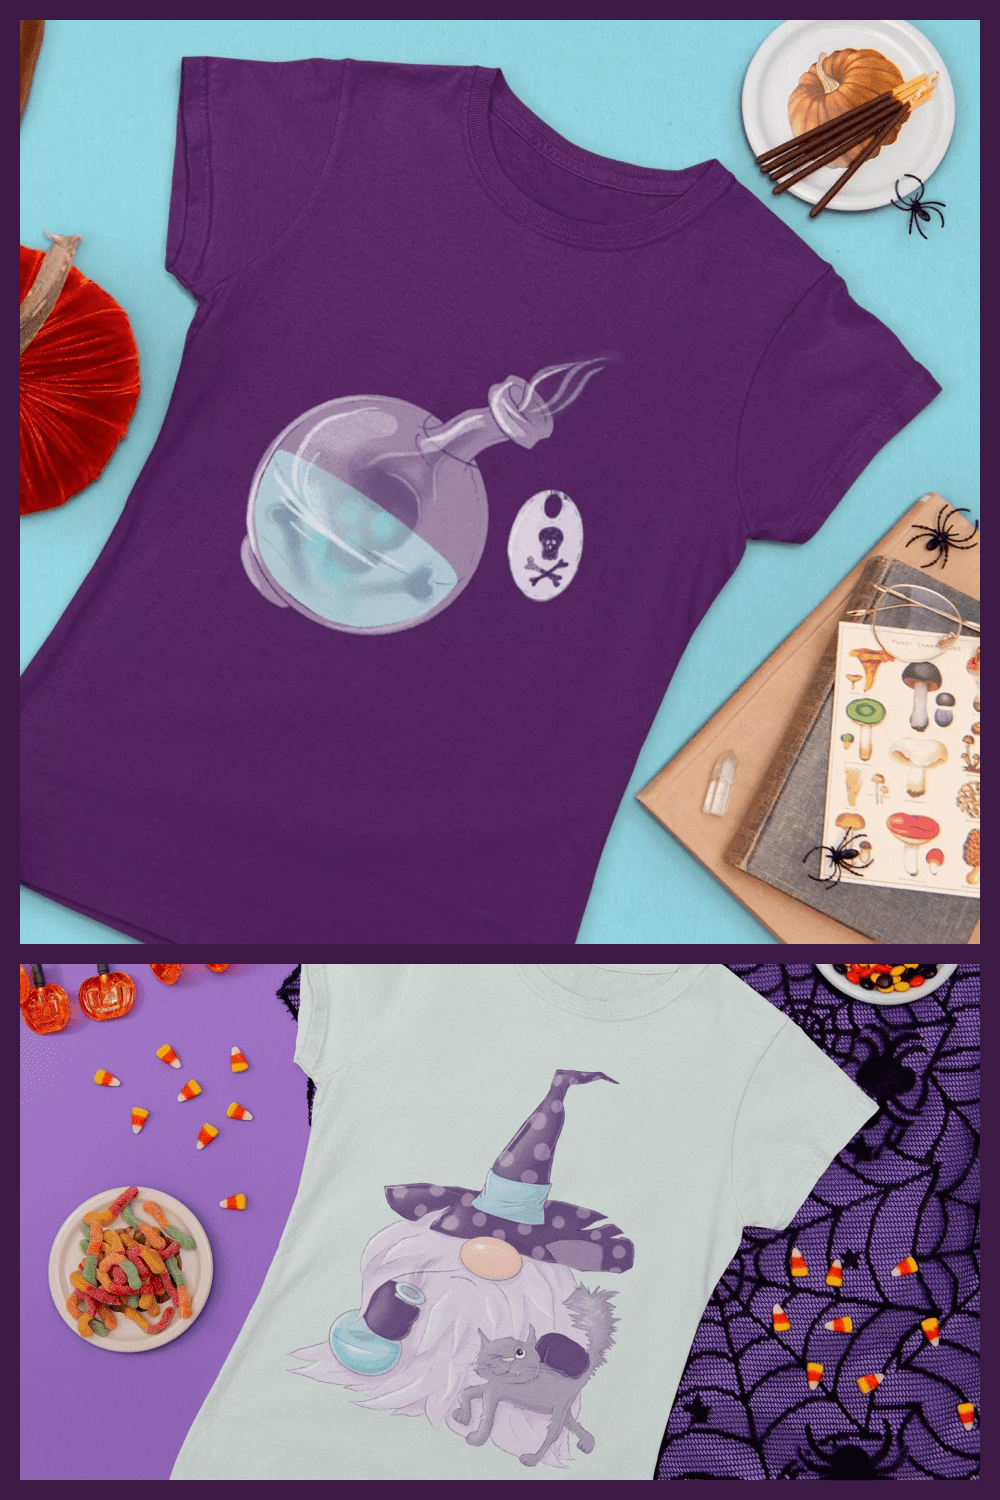 A flask with liquid on a purple t-shirt, a sorcerer with a cat on a white t-shirt.